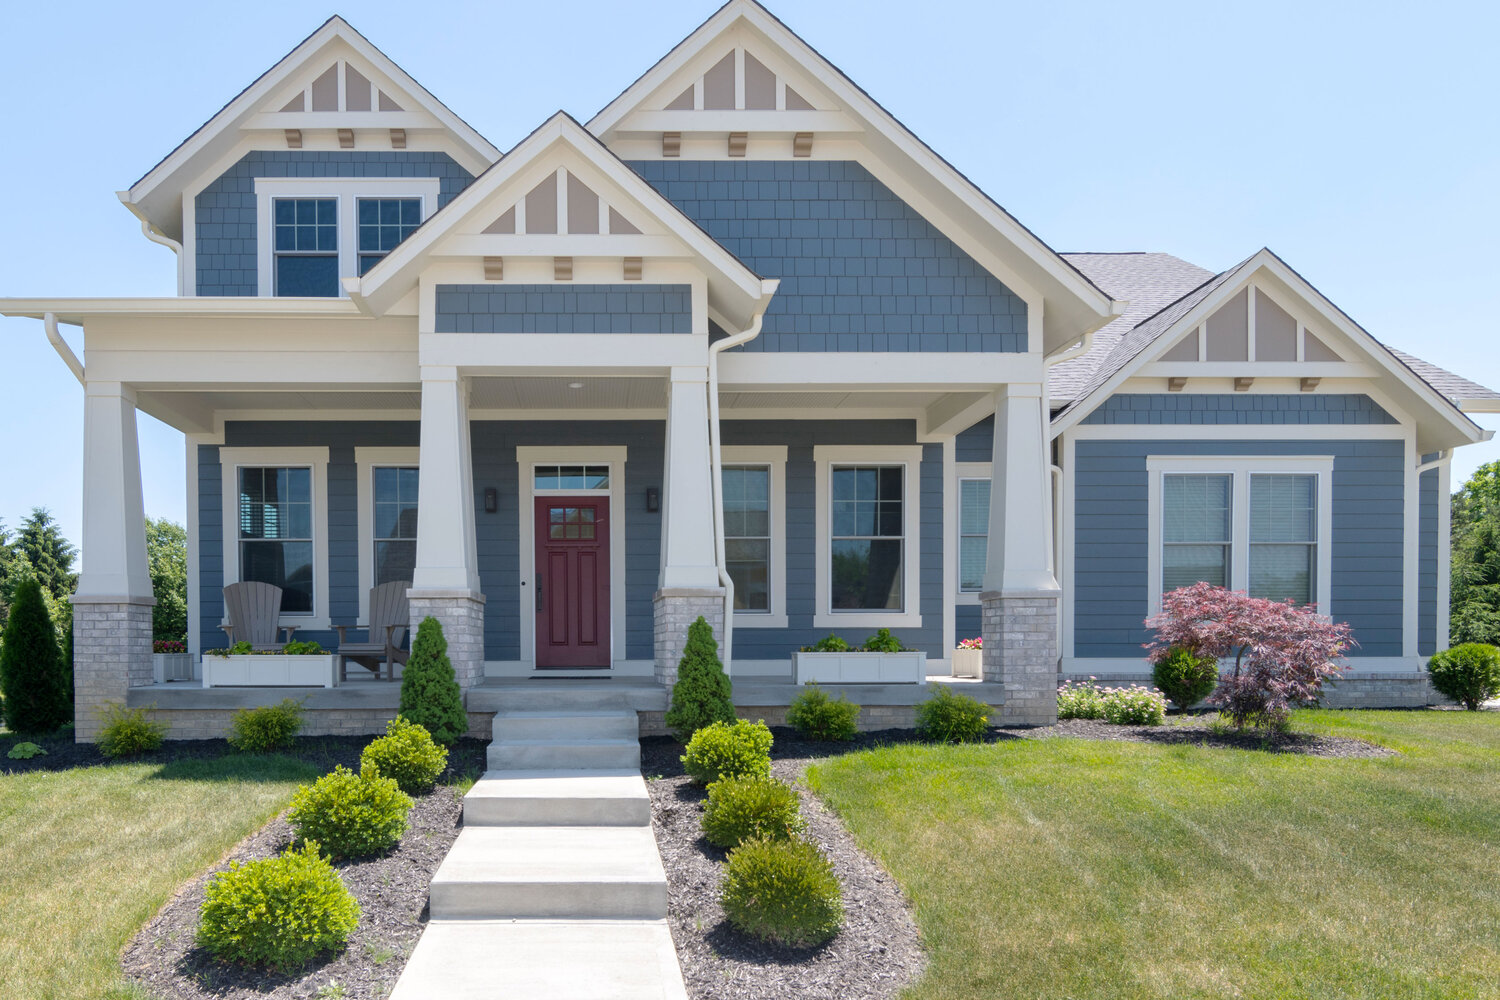 The Craftsman style offers a blend of old and new characteristics such as a covered roof.